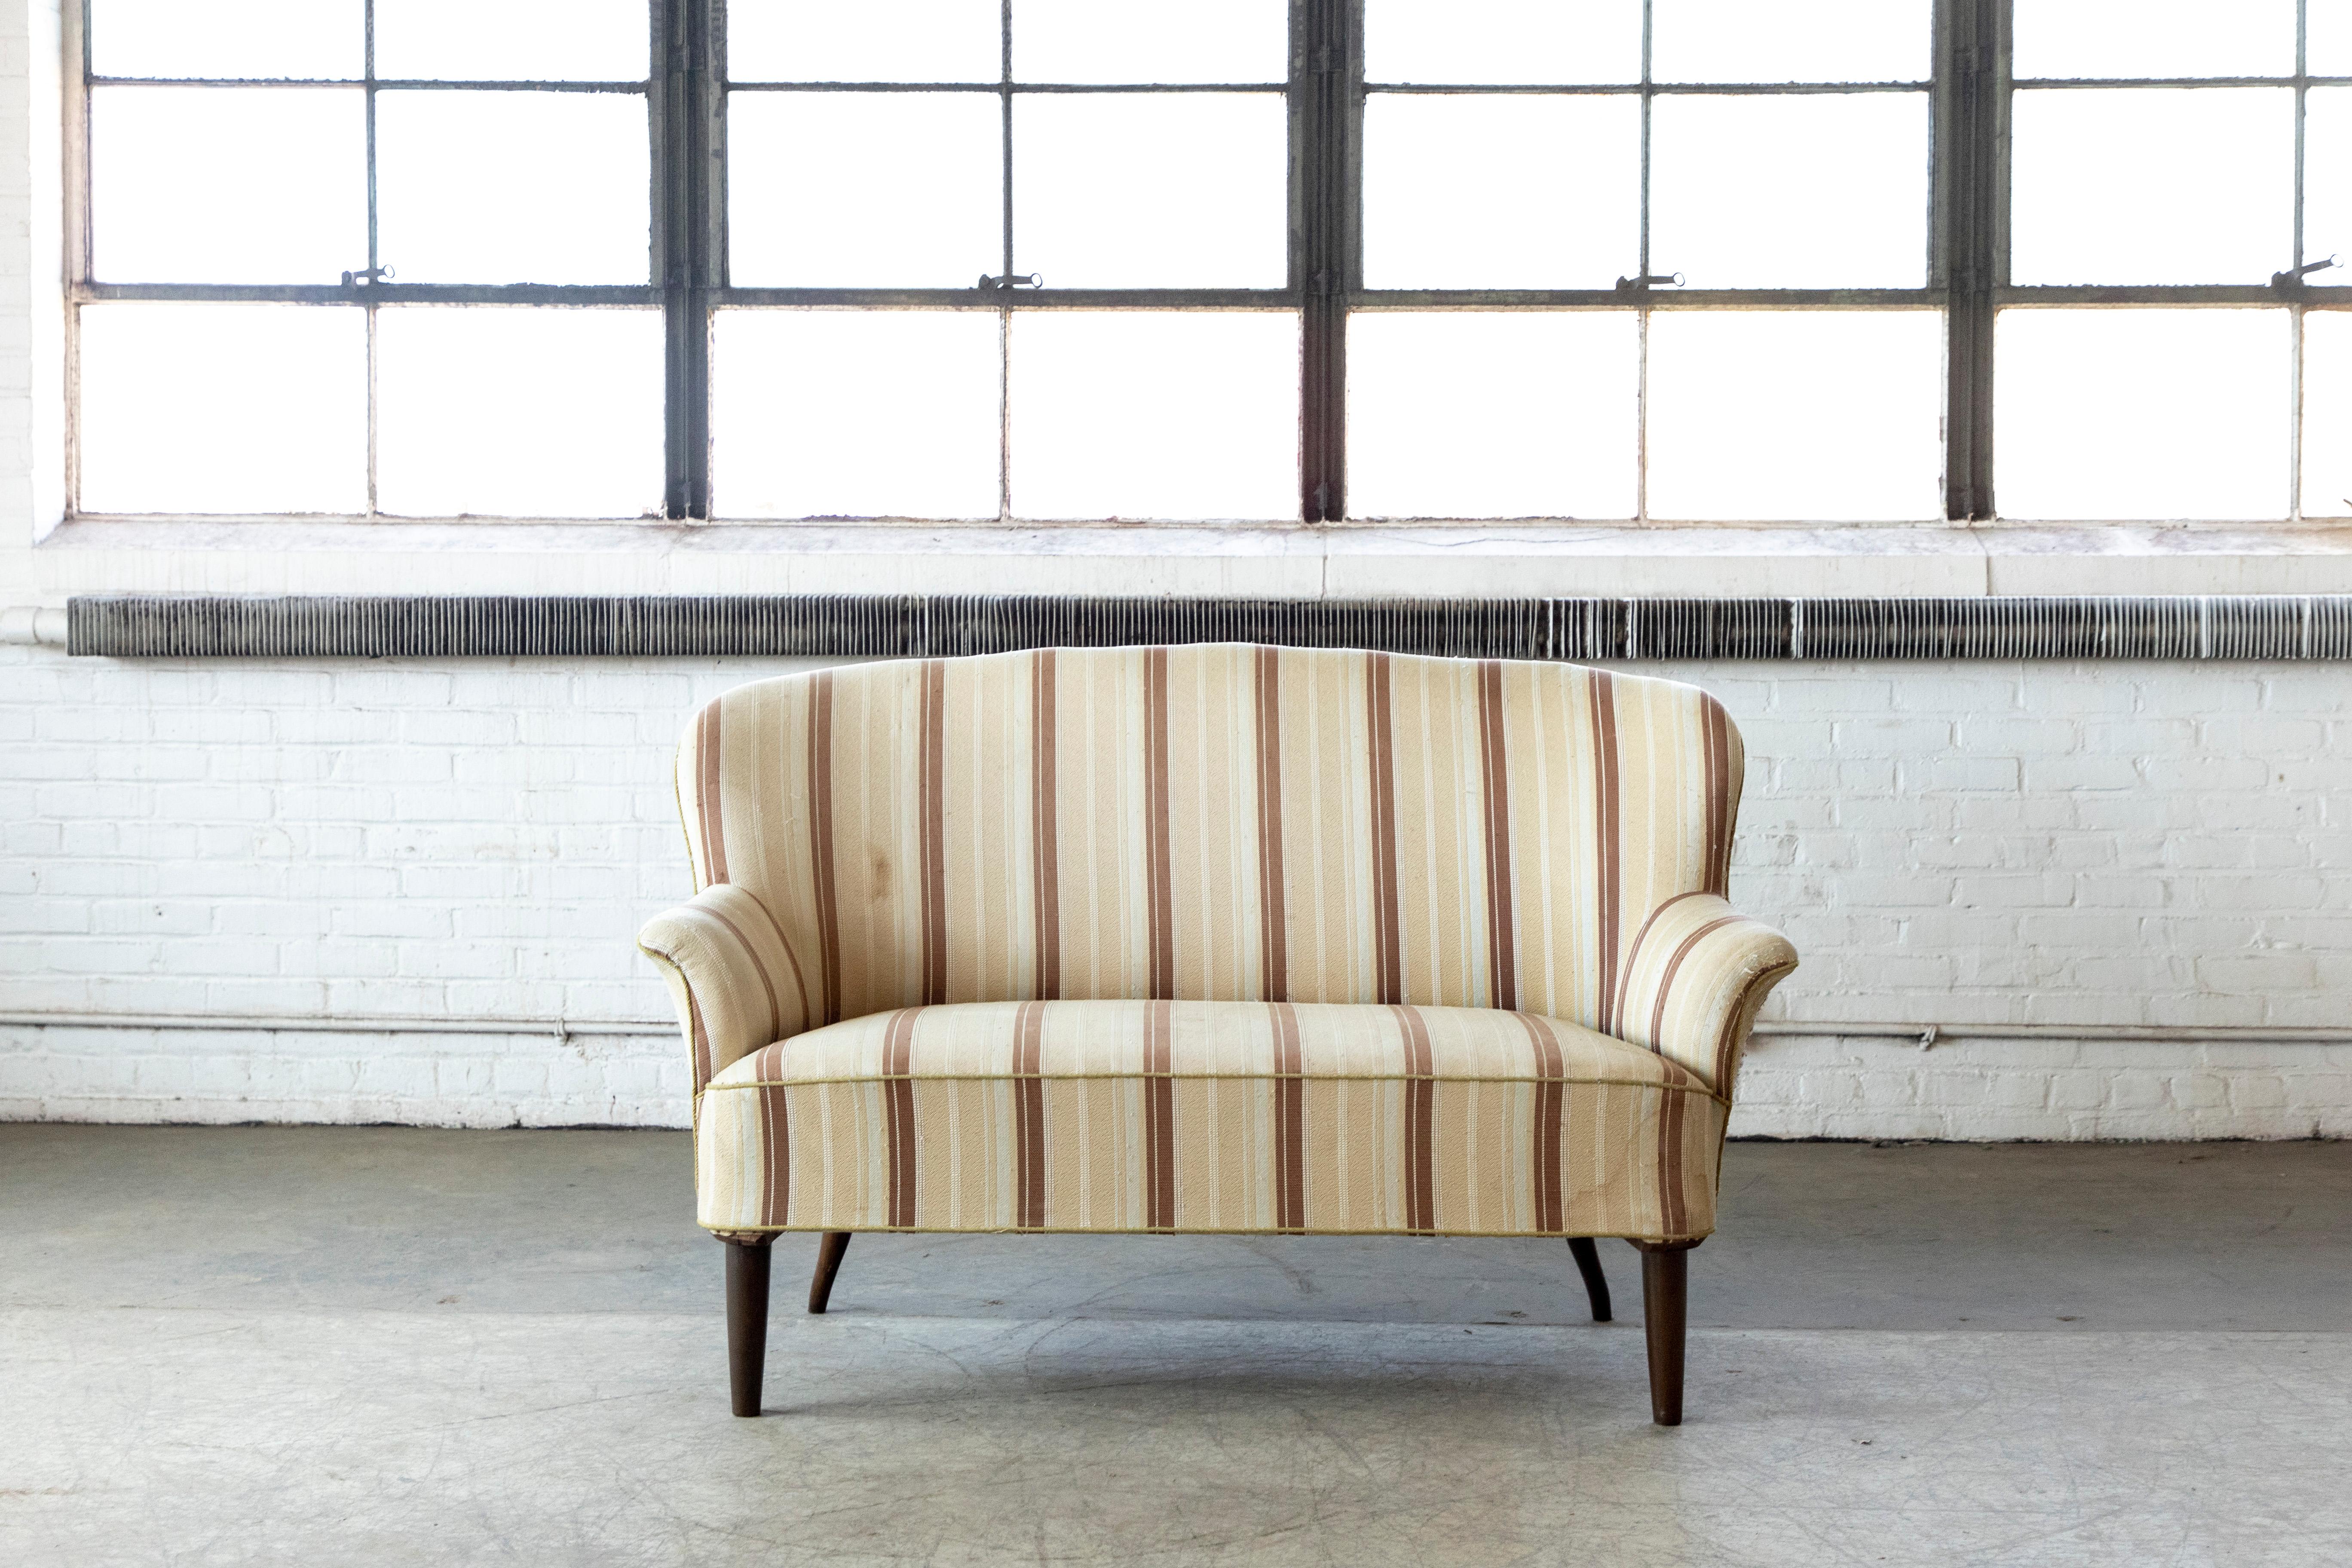 Elegant Danish or Swedish settee or loveseat from circa 1950s in the style of Carl Malmsten. We found this charming settee near Copenhagen but it has clear Swedish design cues namely the roll on the armrest and the high backrest but even more so the